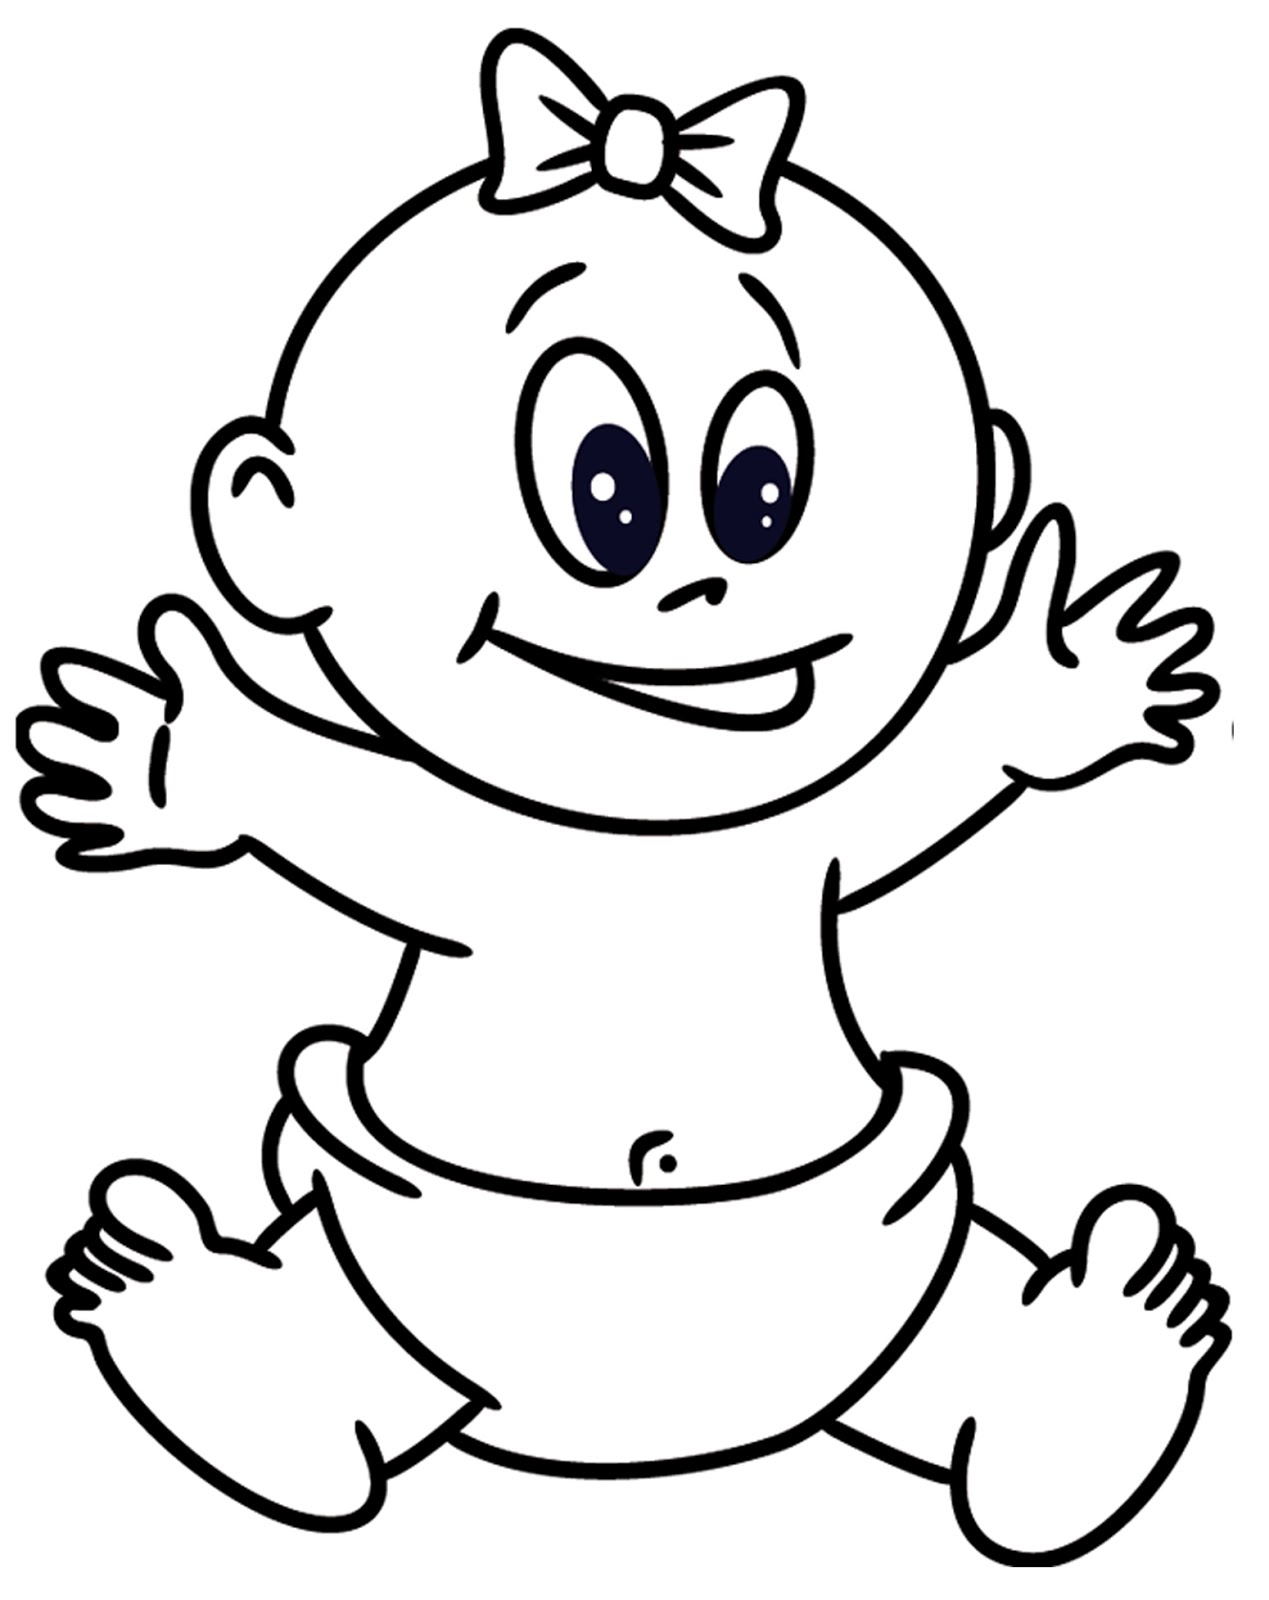 clipart baby black and white - photo #4